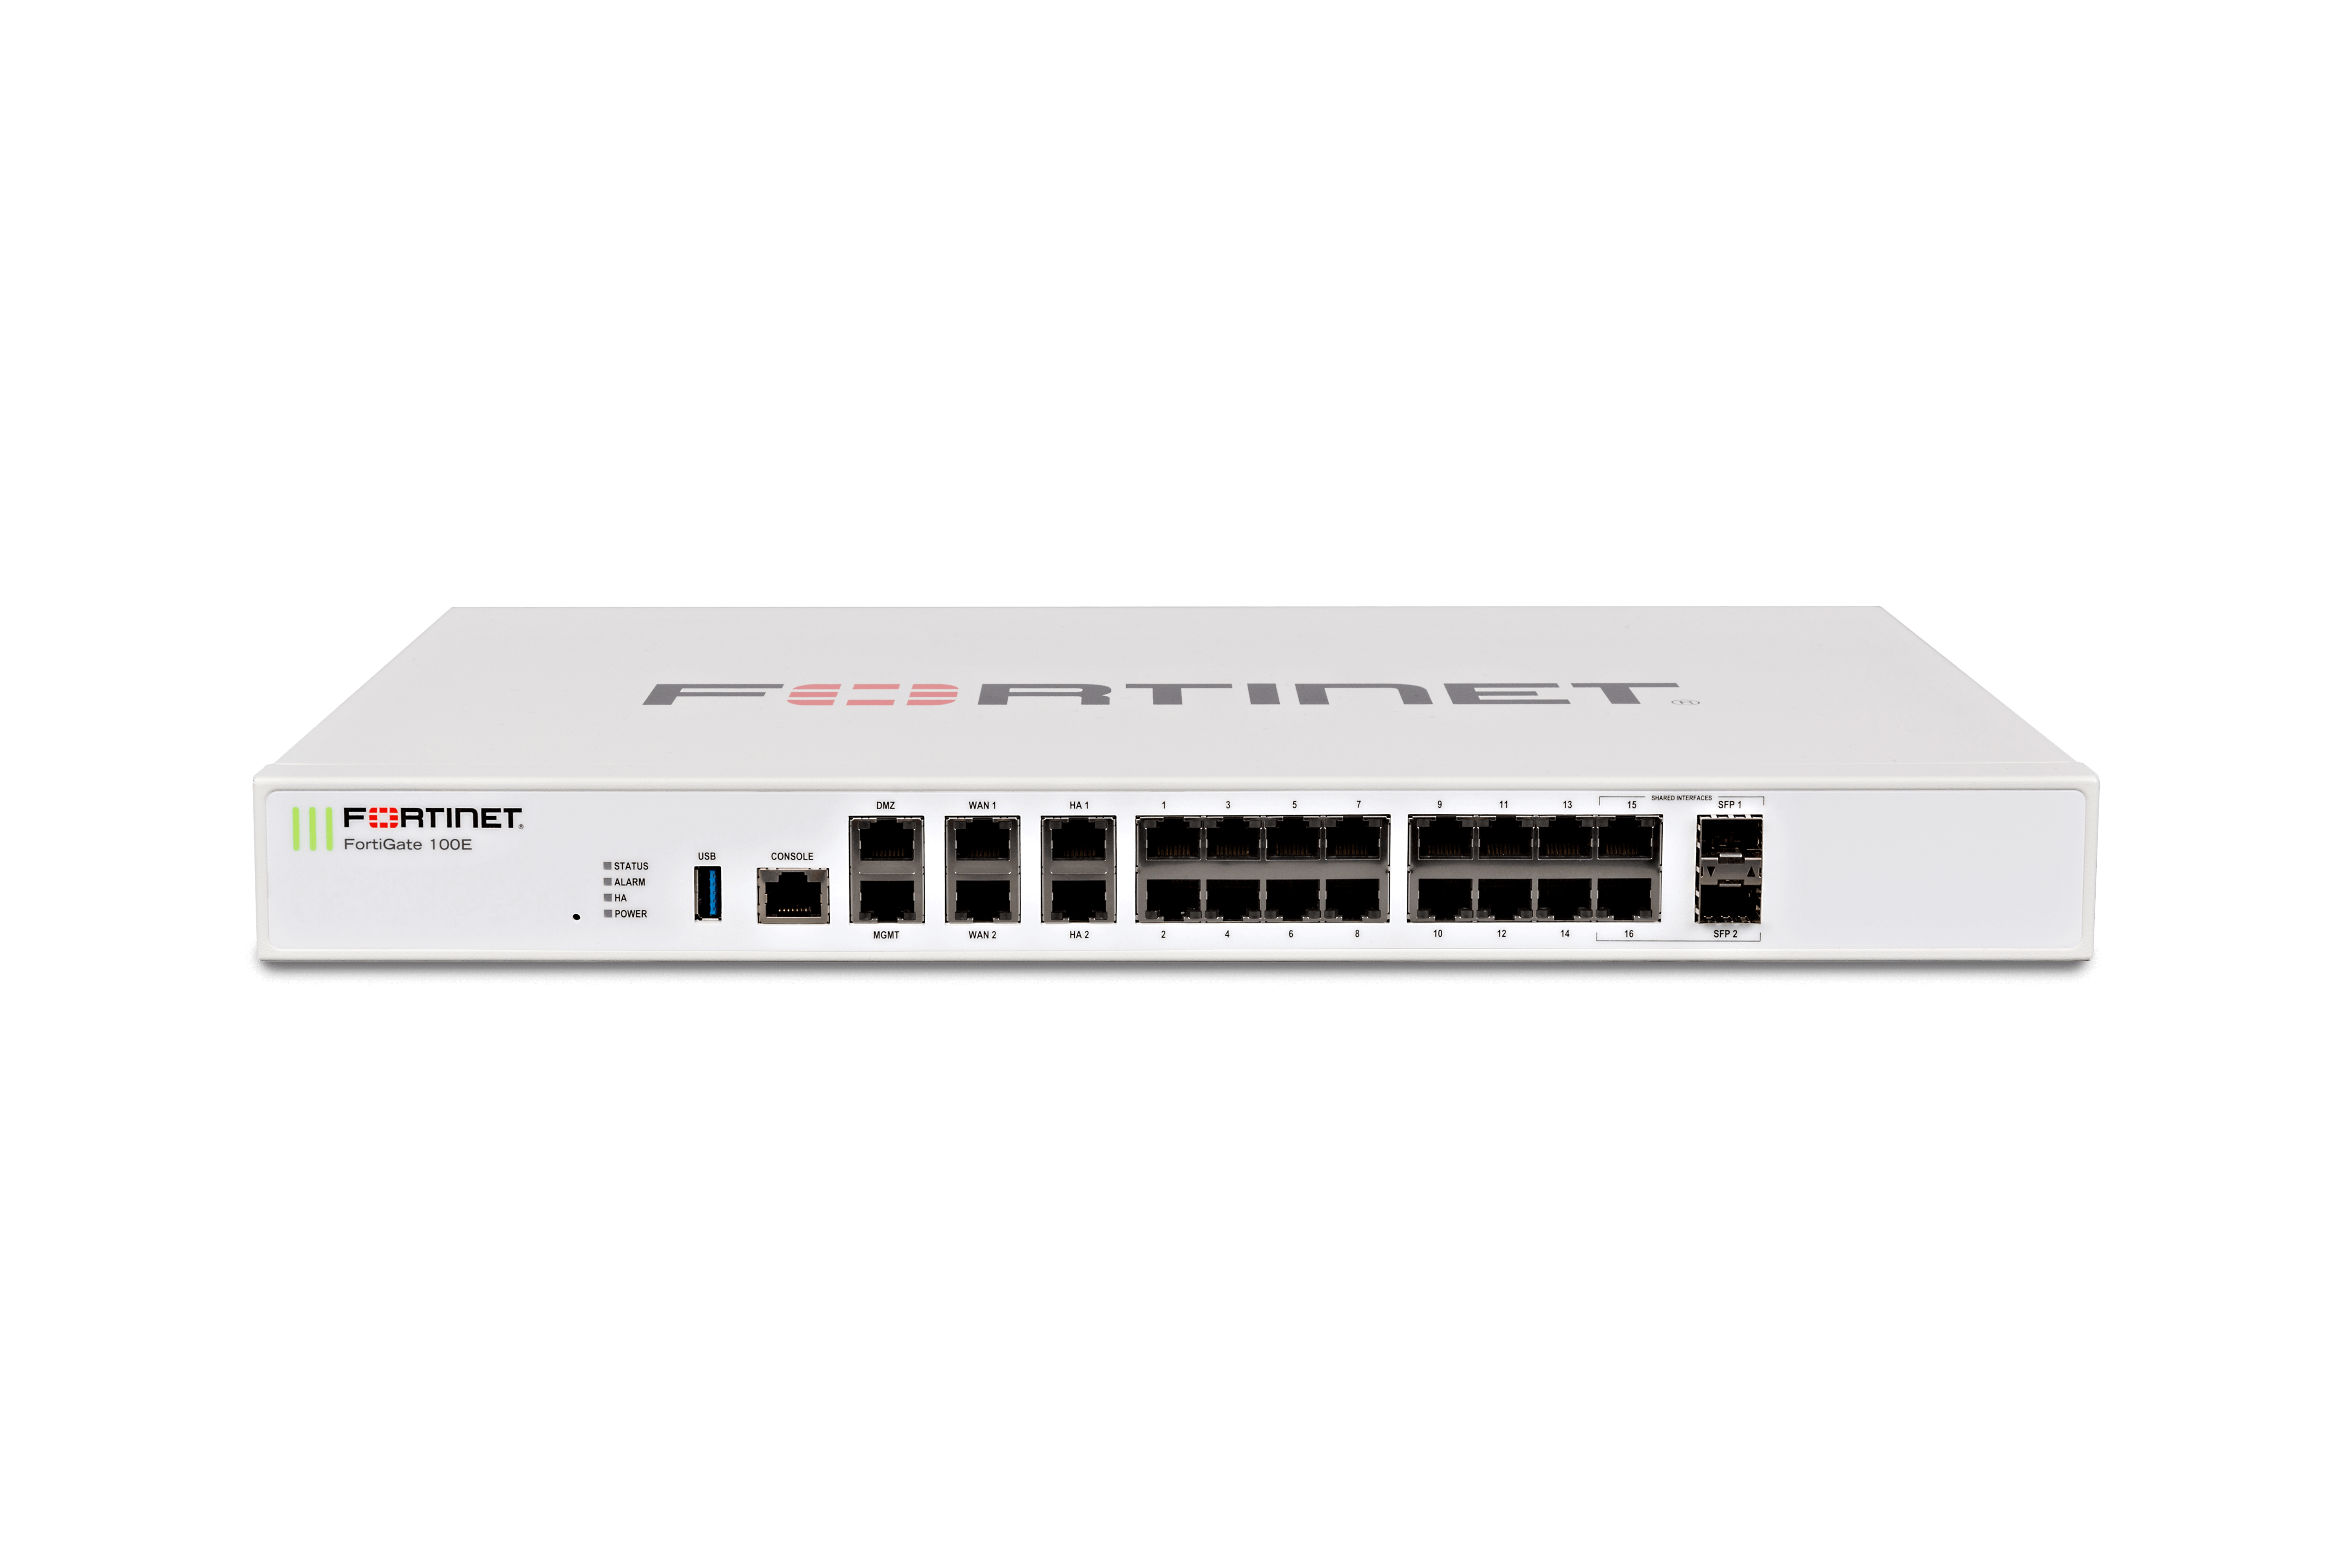 Fortinet FortiGate 100E Firewall (End of Sale/Life)